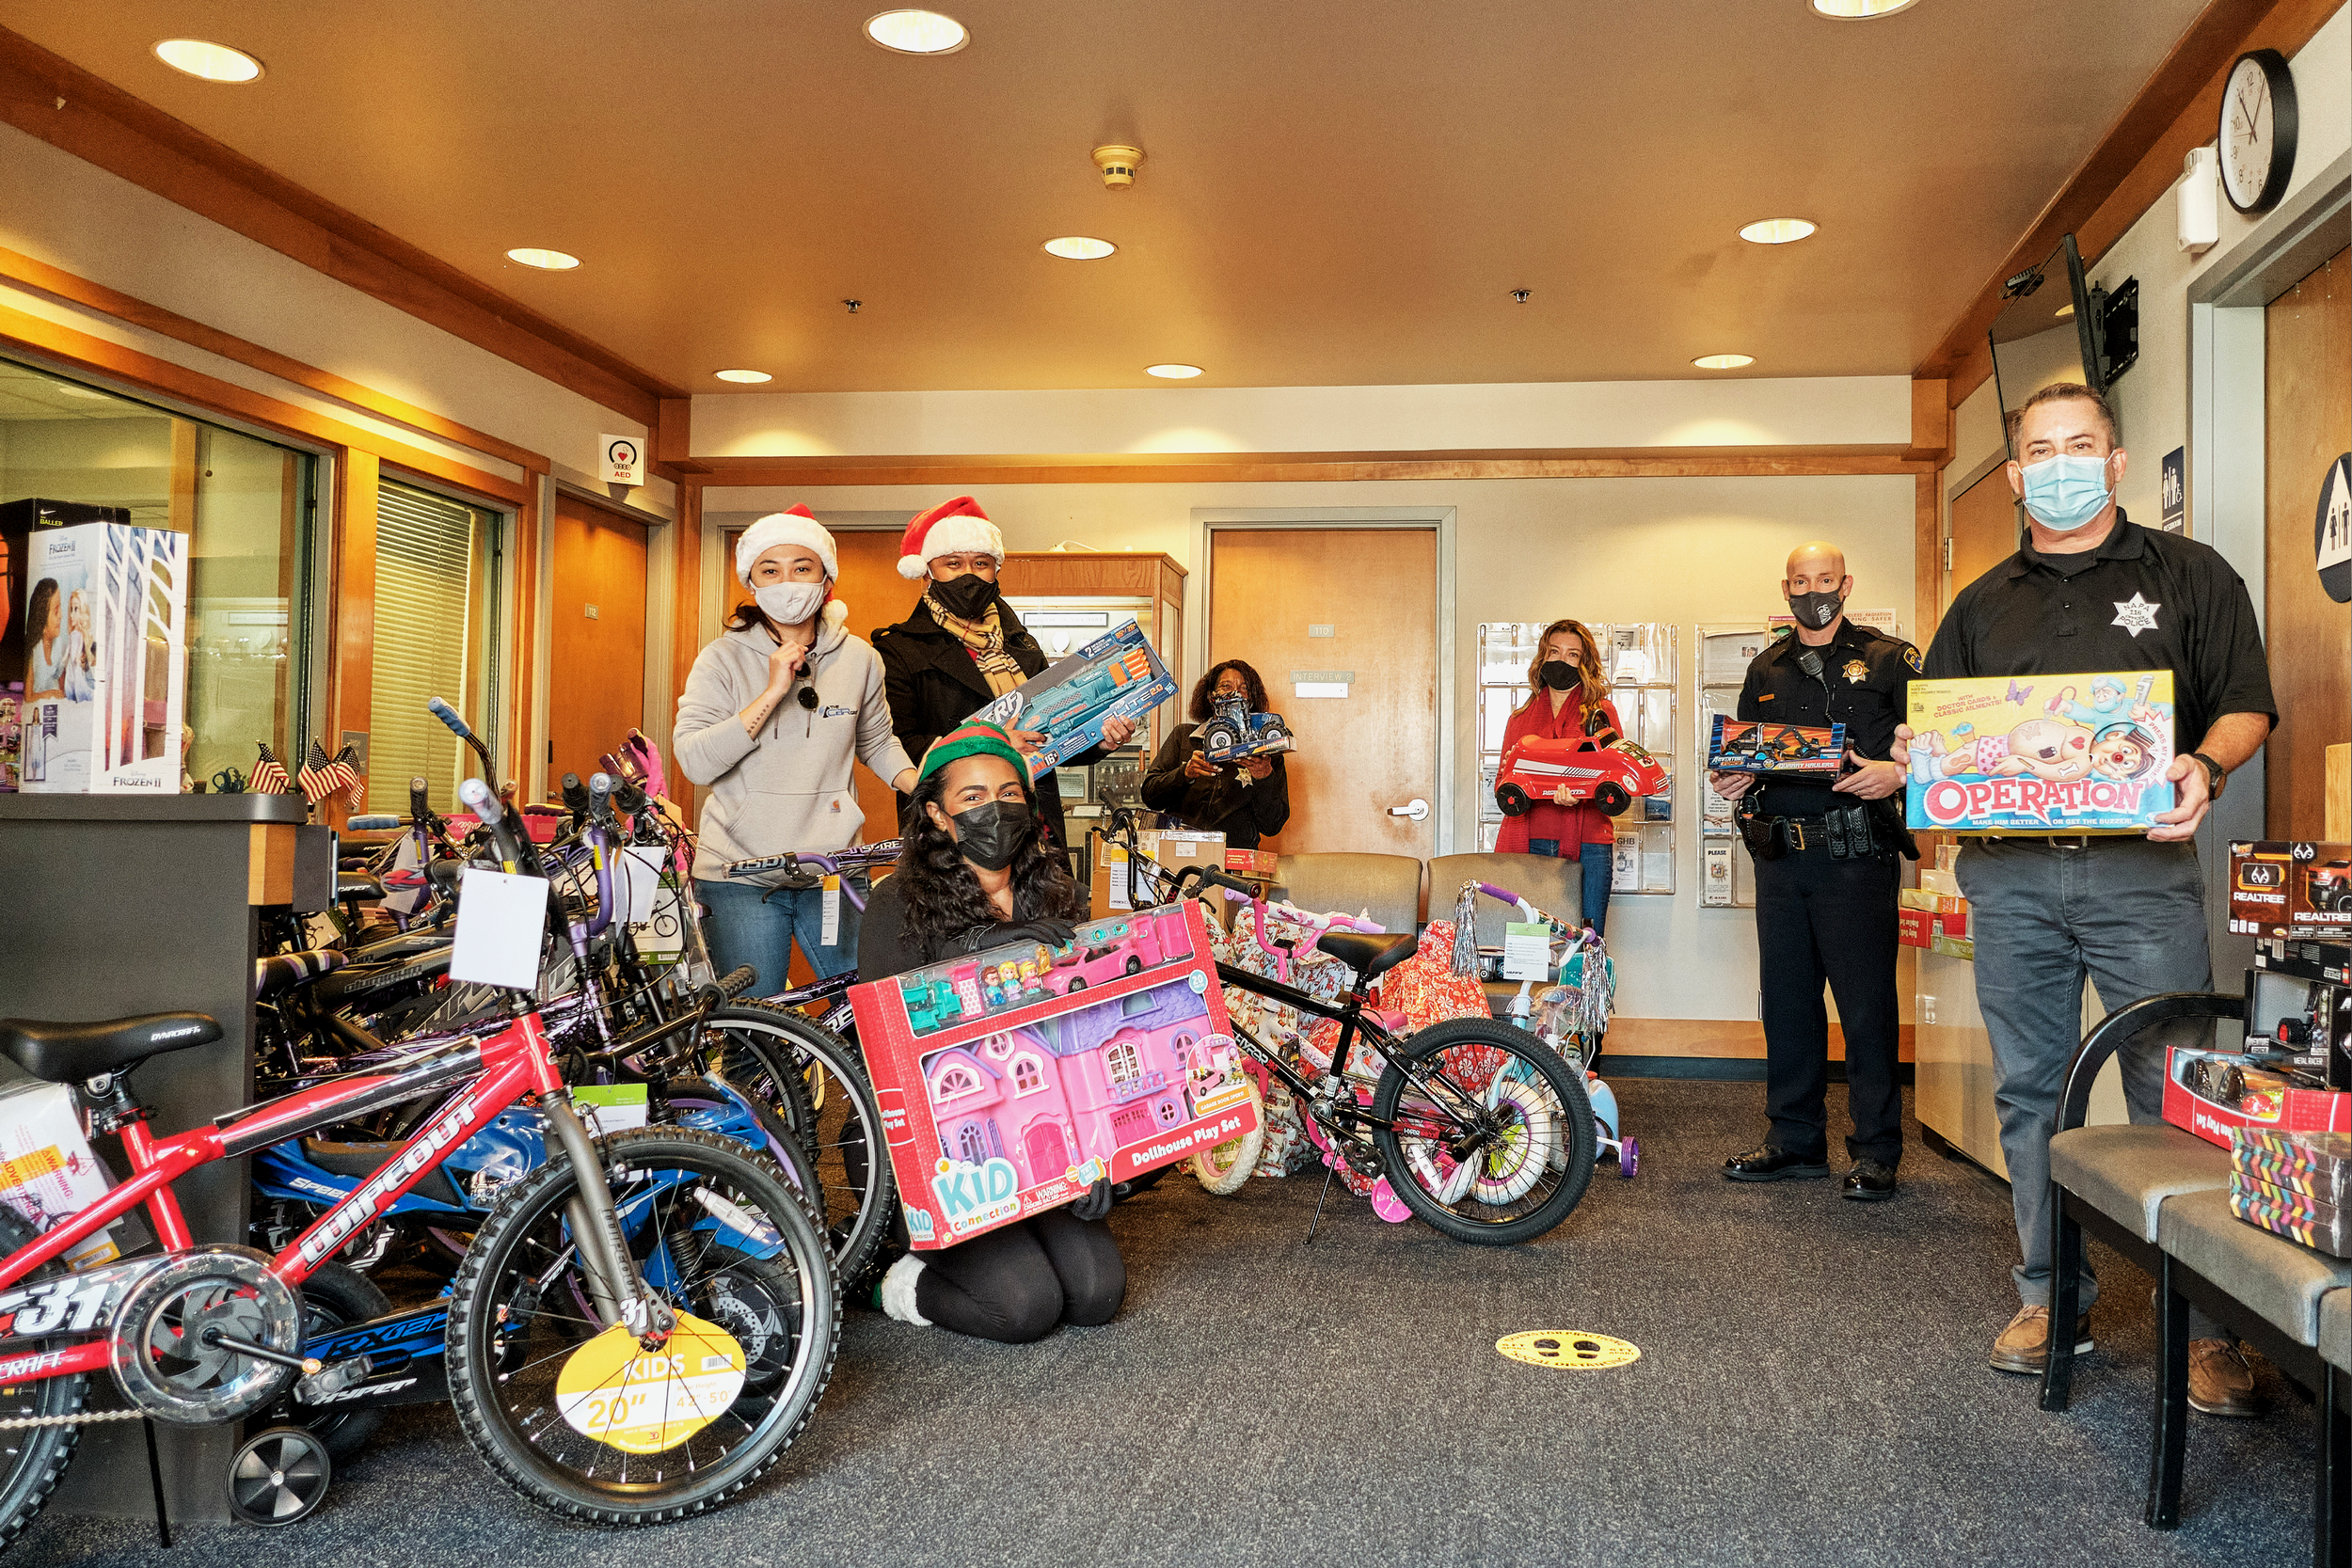 CBR Toy Drive Drop Off at Napa Police Station Everyone Image 2.png